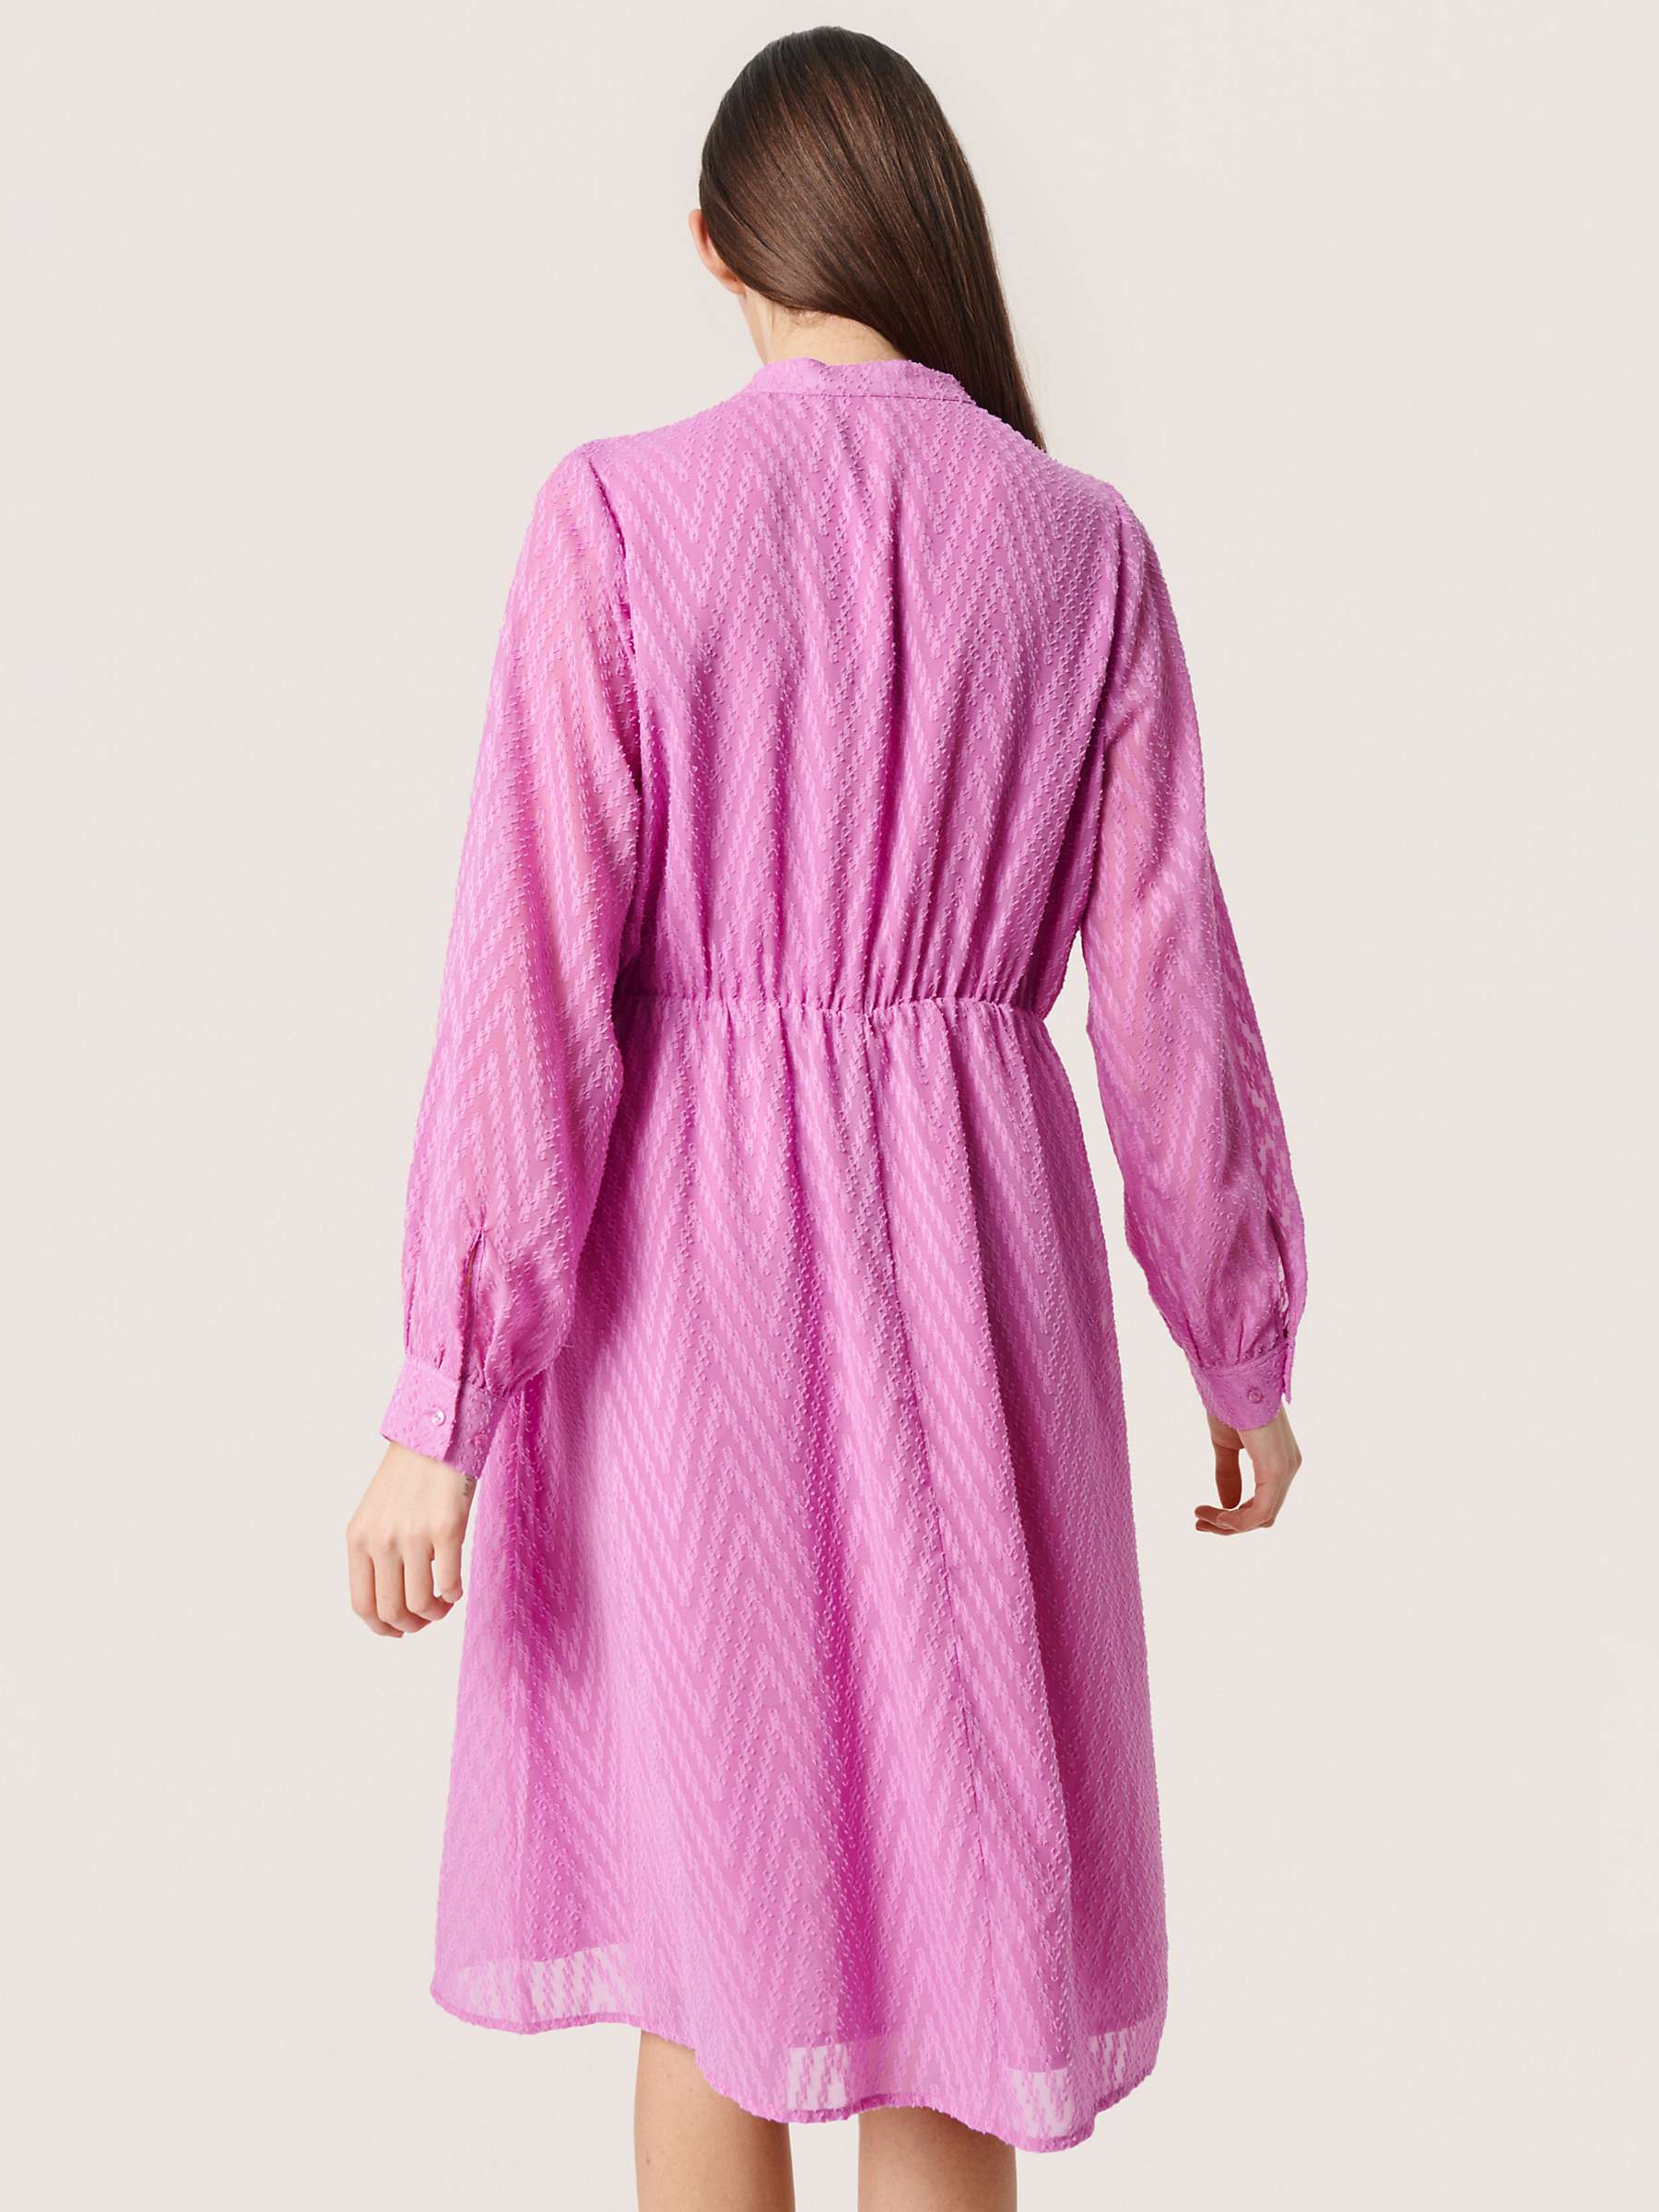 Buy Soaked In Luxury Lavira Luciana Dress, Liatris Online at johnlewis.com